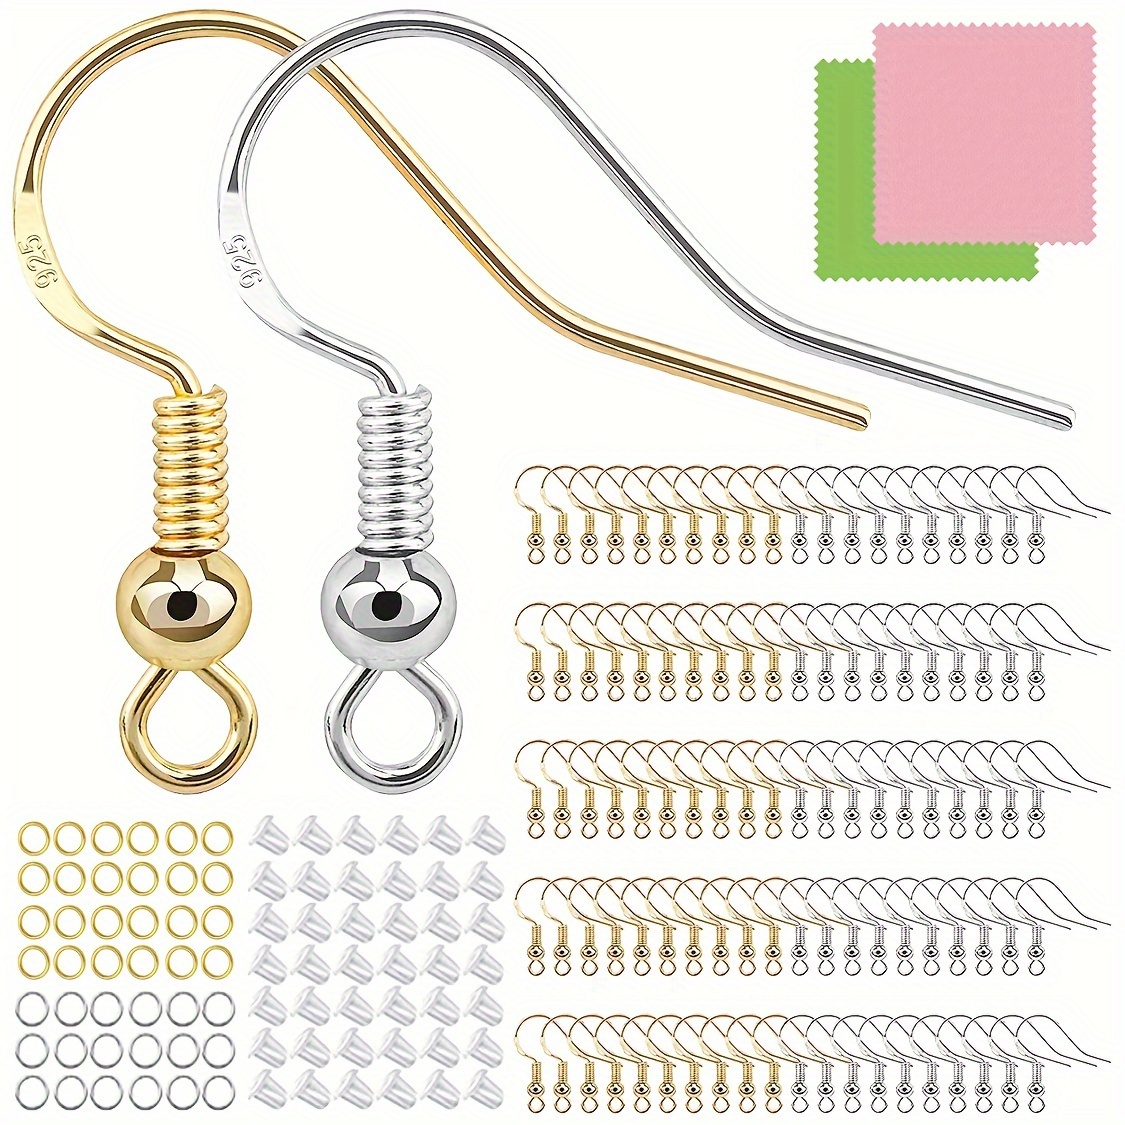 Hypoallergenic Fish Hooks Earrings - 120 PCS/60 Pairs White Gold Plated Ear  Wires Fish Hooks for Jewelry Making, Jewelry Findings Parts with 120 PCS  Rubber Earring Backs Stopper for DIY Earrings 